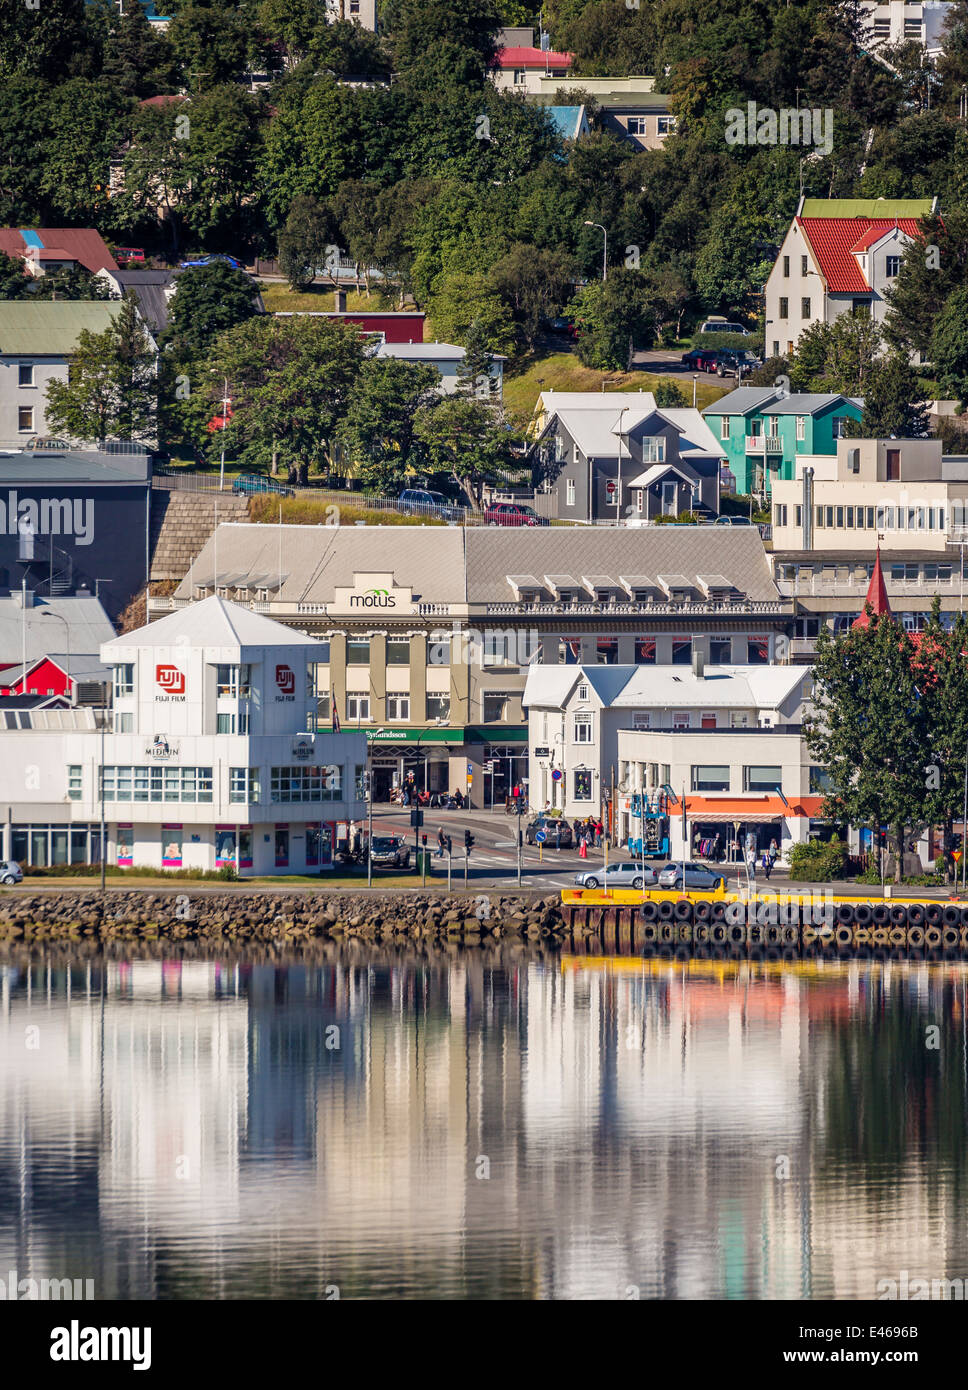 Pier with Homes and Apartments, Akureyri, Iceland Stock Photo